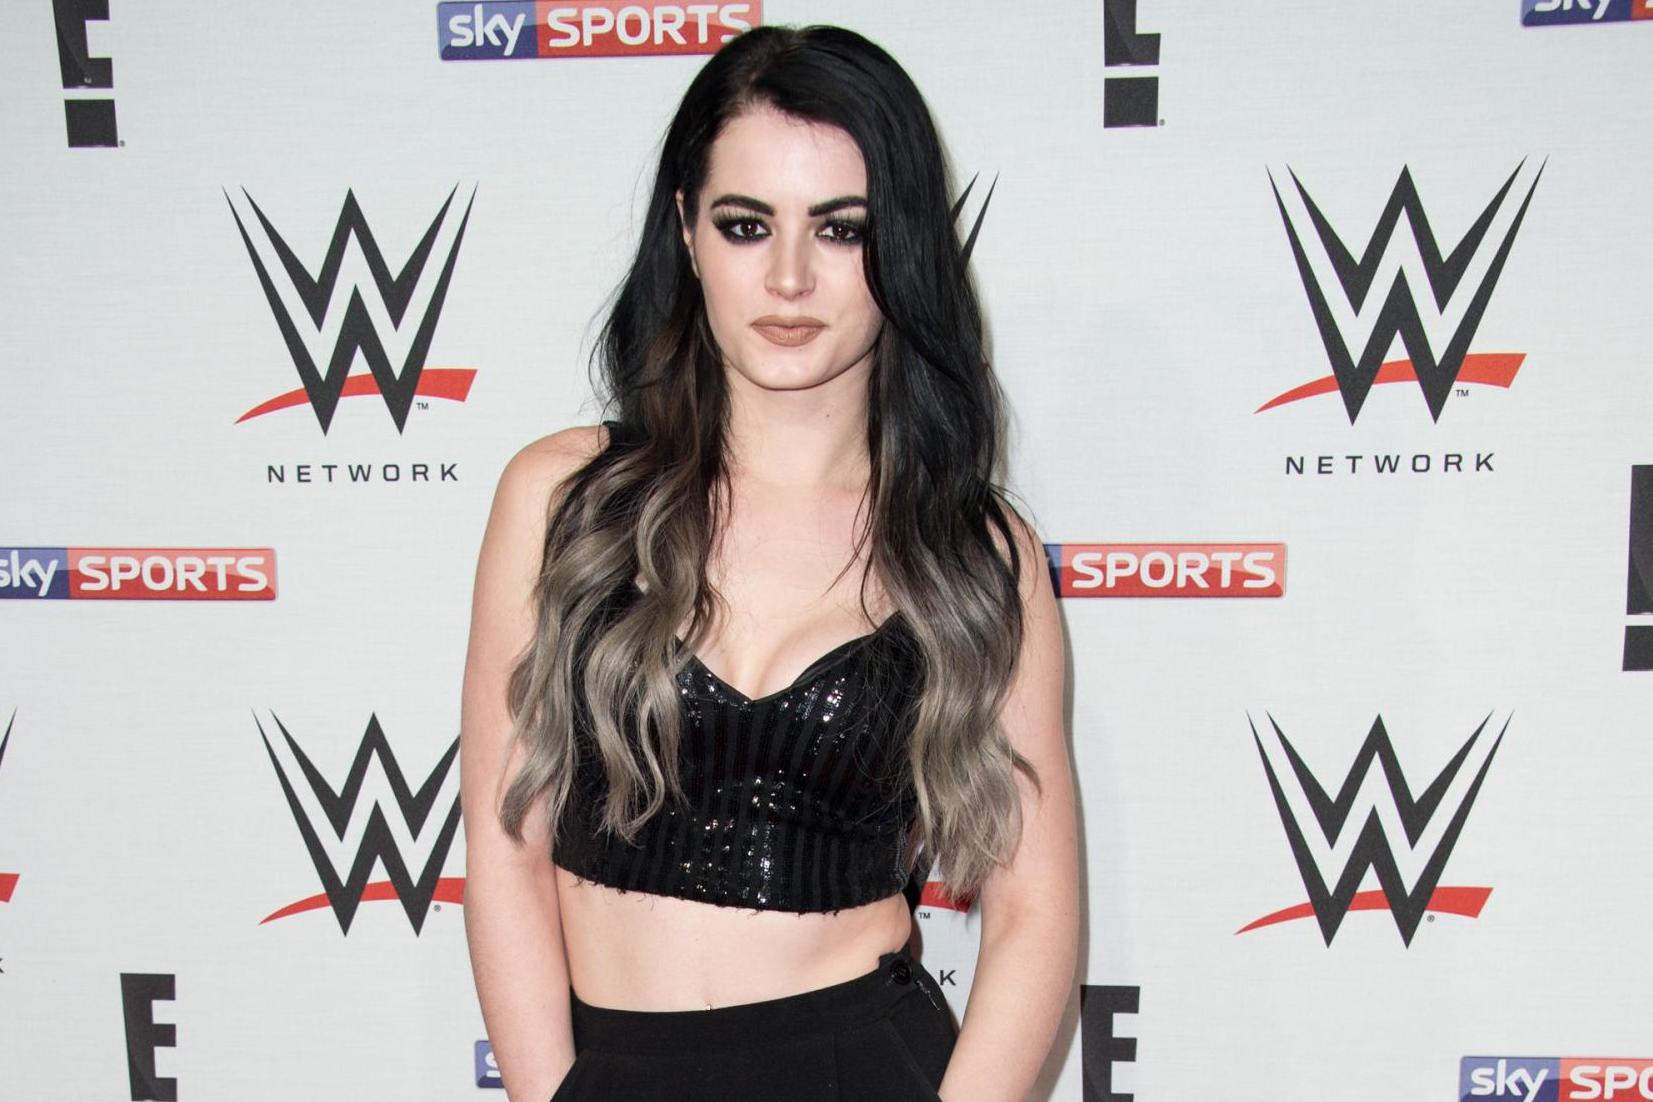 Wwe Stars Sex Videos - Who is Paige? Everything you need to know about the WWE star | The ...